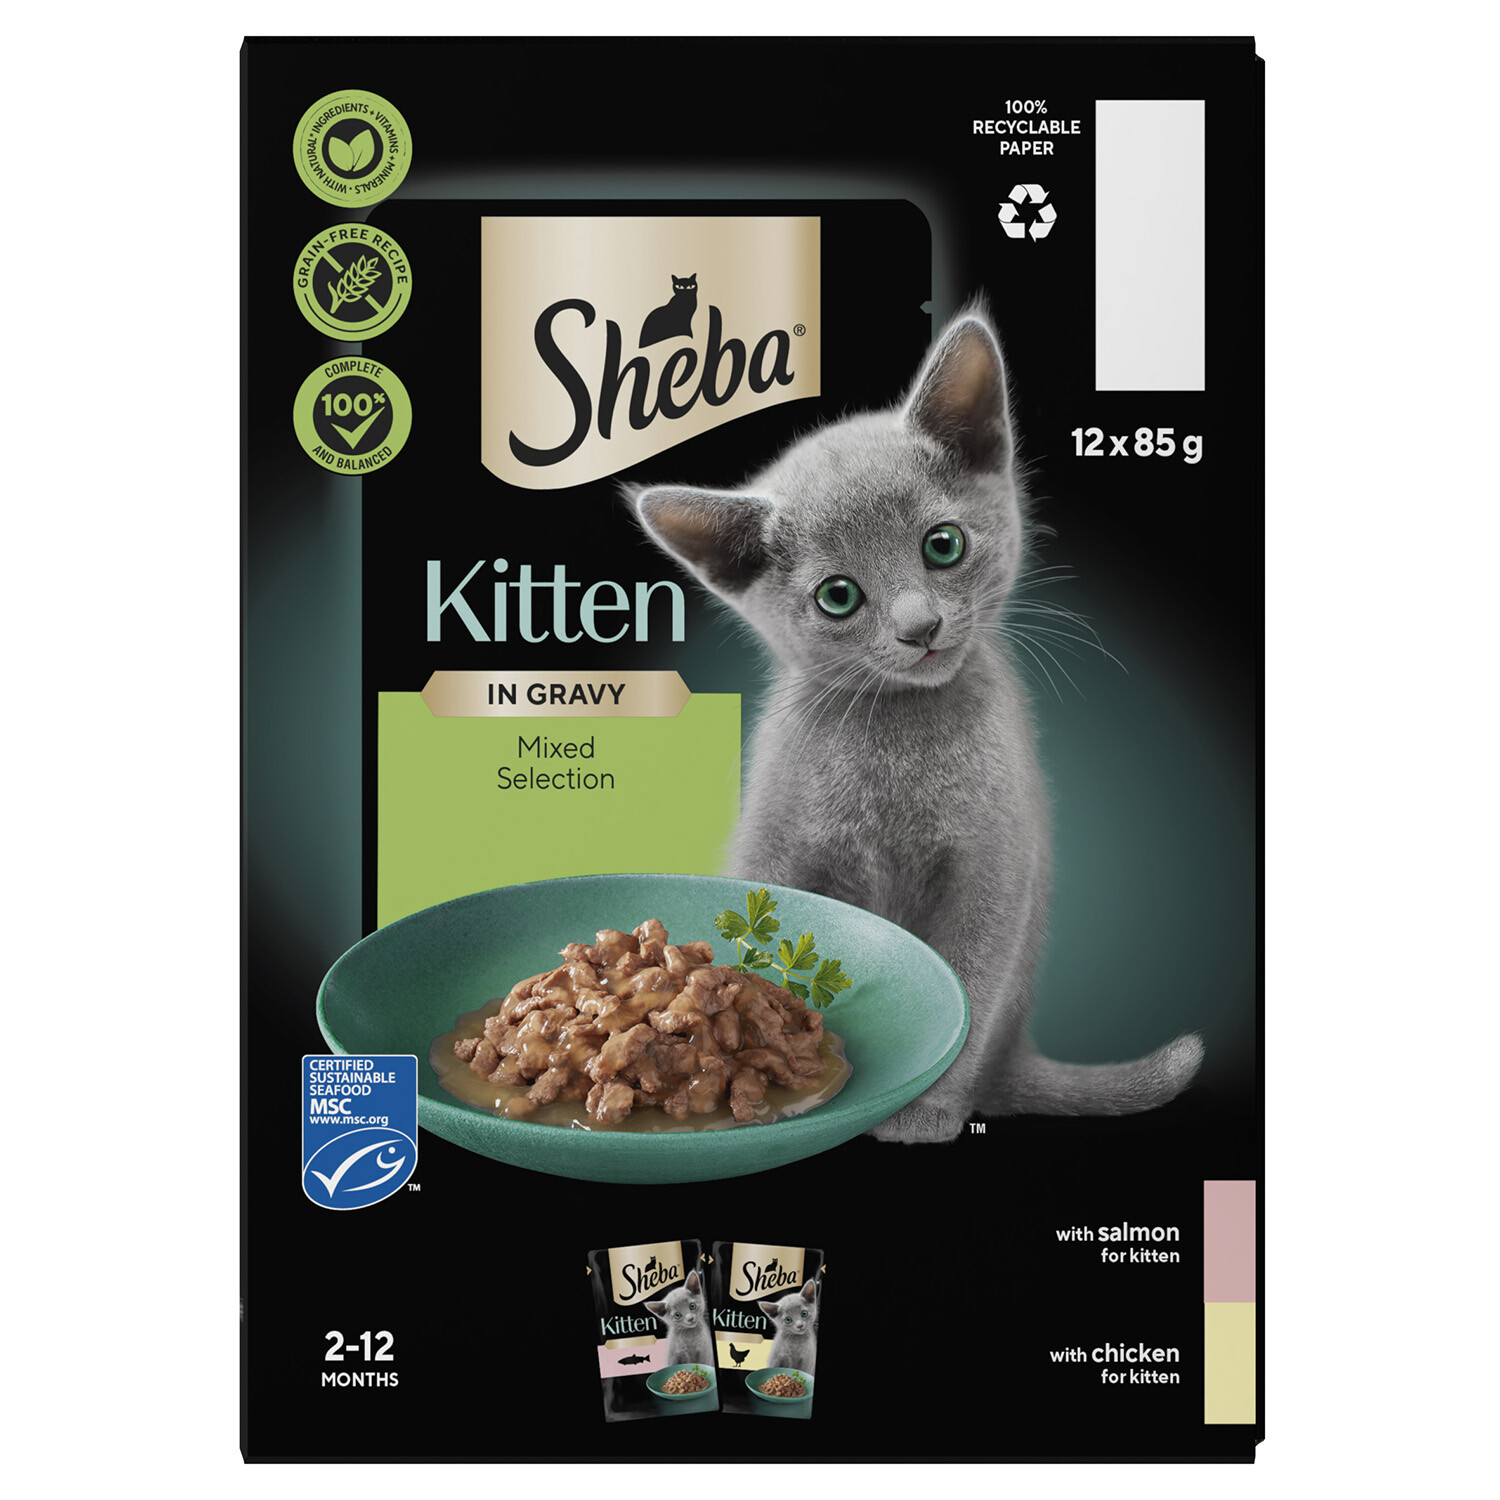 Sheba Mixed Selection Kitten Food Pouches in Gravy - 12 Image 4